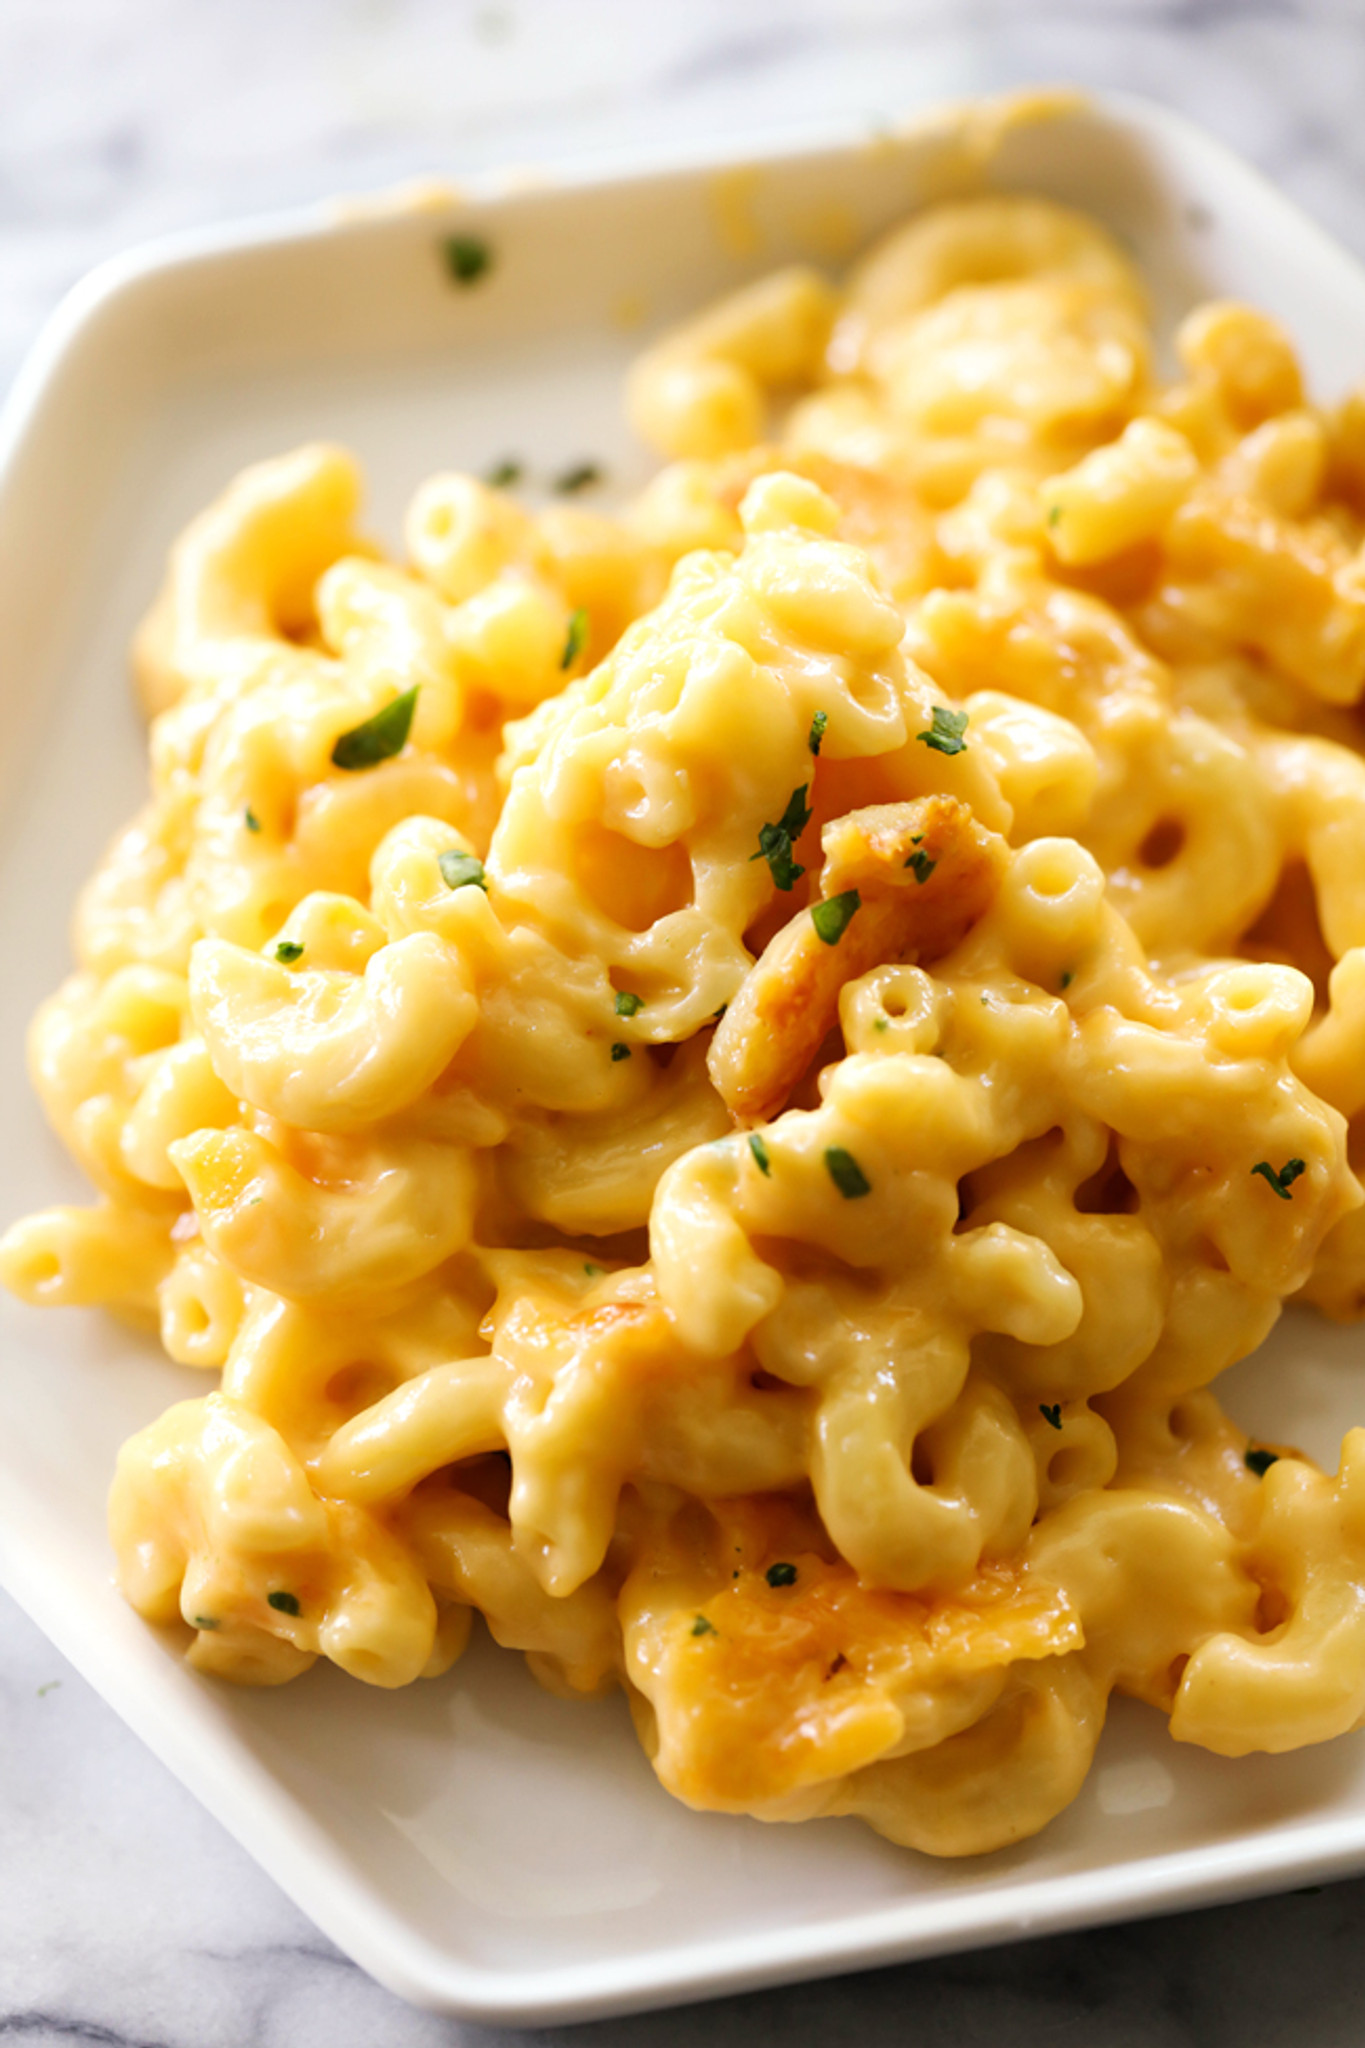 what is the best mix of cheese for macaroni and cheese